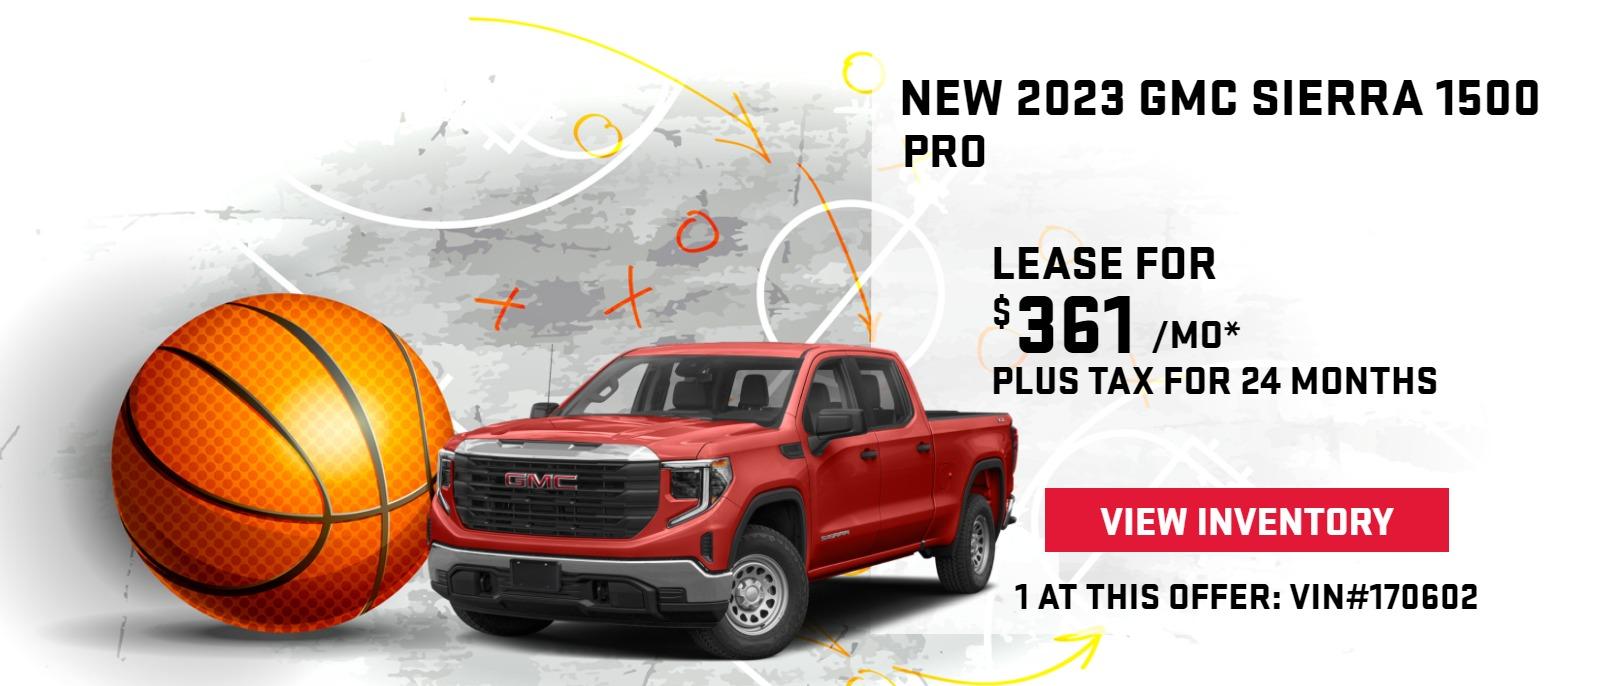 New 2023 GMC Sierra 1500 Pro
$361/mo* Lease + Tax for 24 Months
1 at this offer. VIN #s 170602.